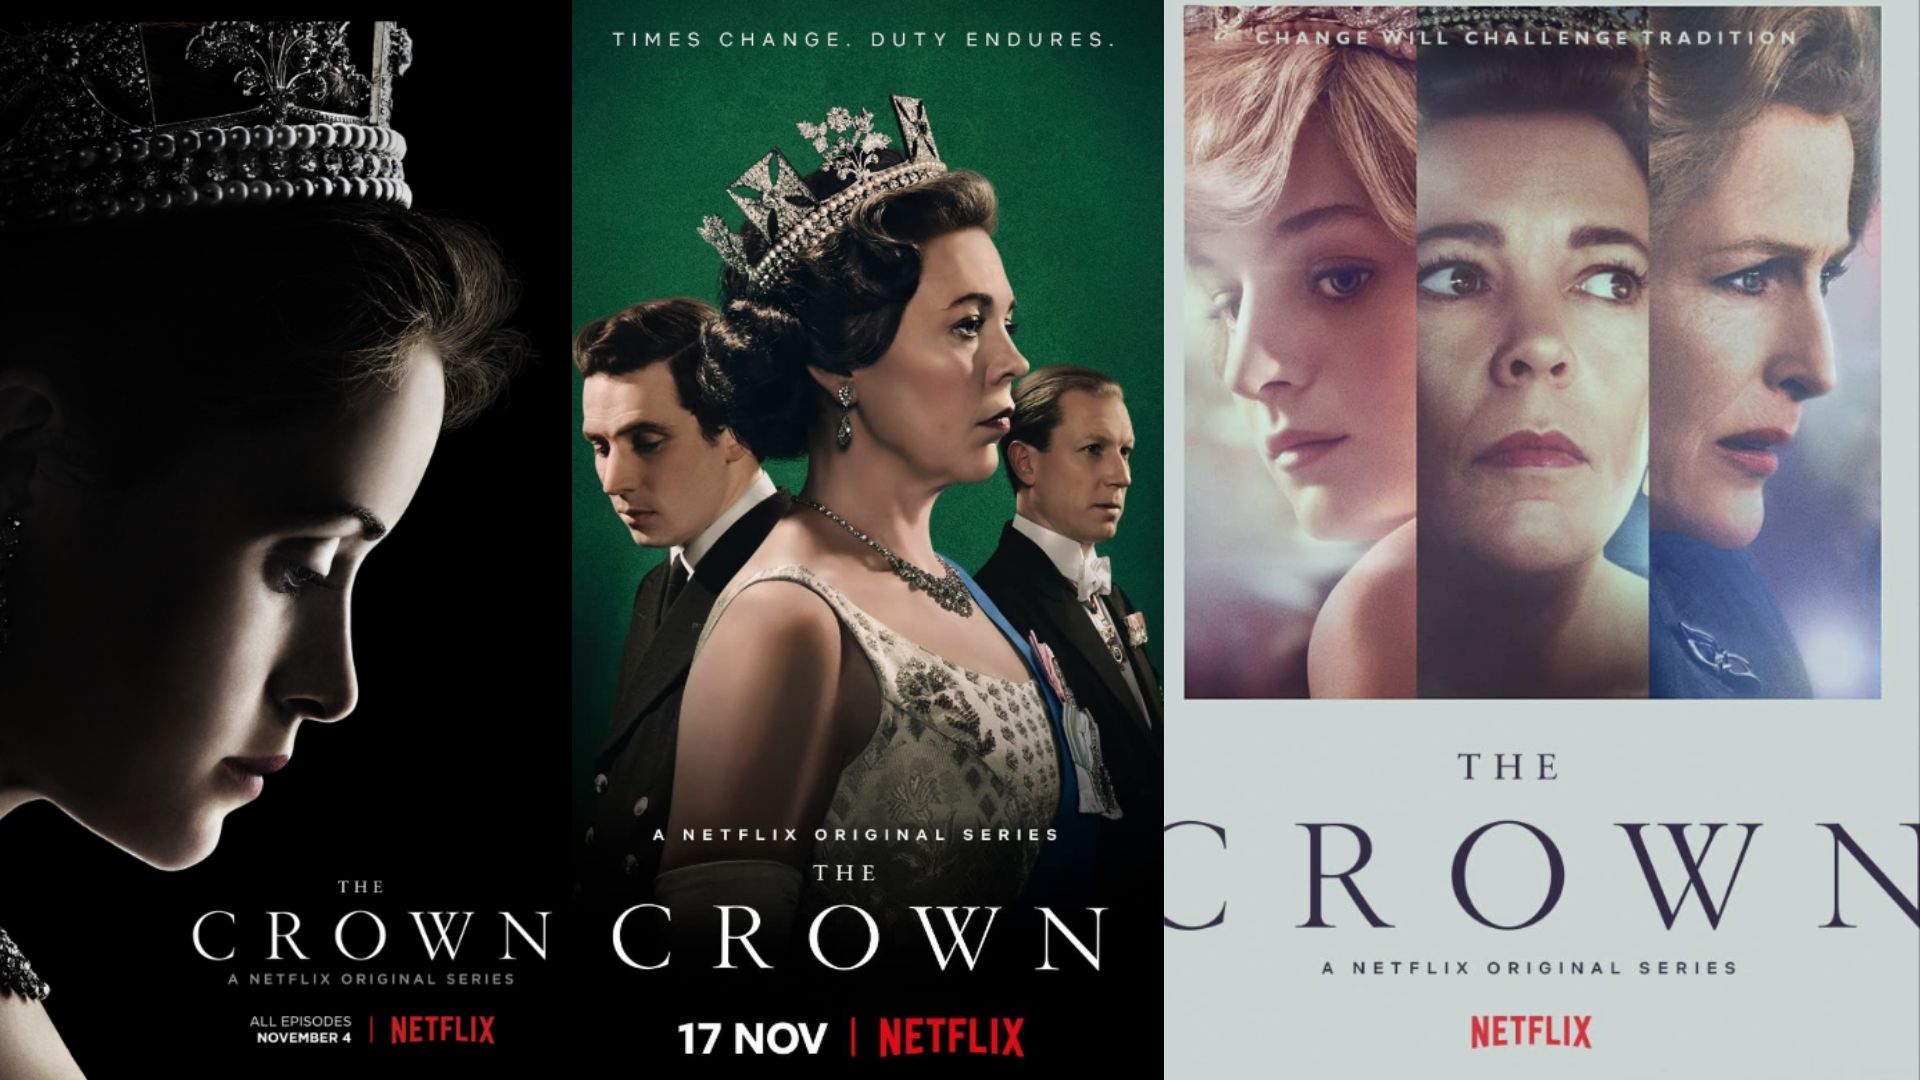 Viewership For 'The Crown’ Boosts Up 800% After The Death Of Queen Elizabeth II